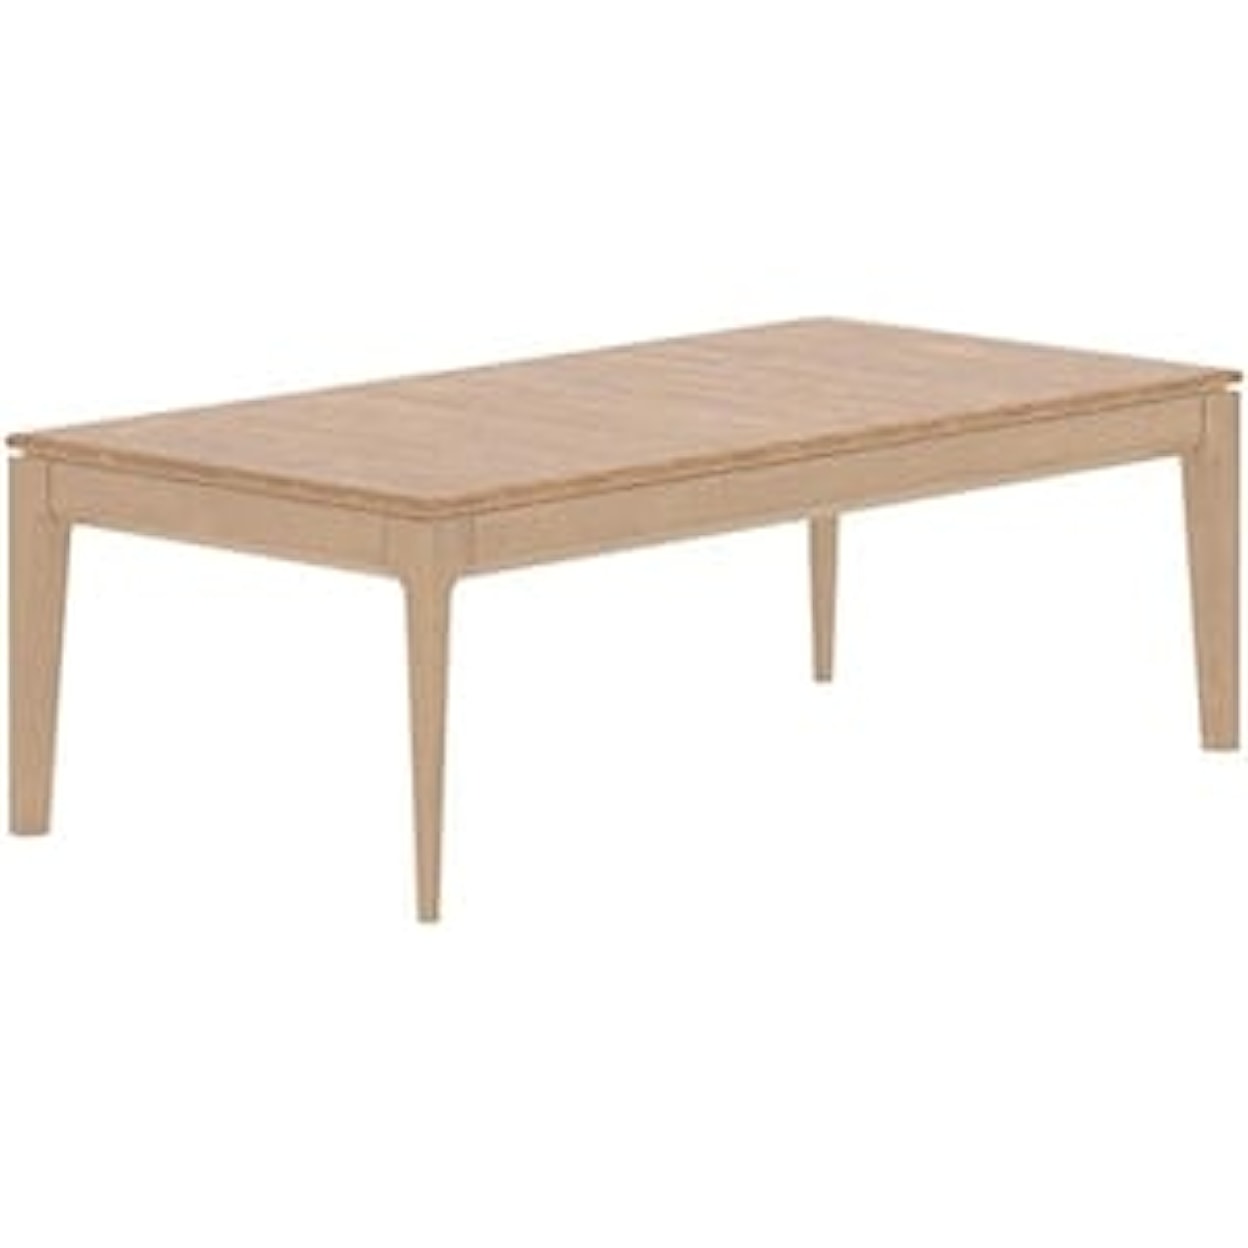 Canadel Accent Essence Rectangular Coffee Table